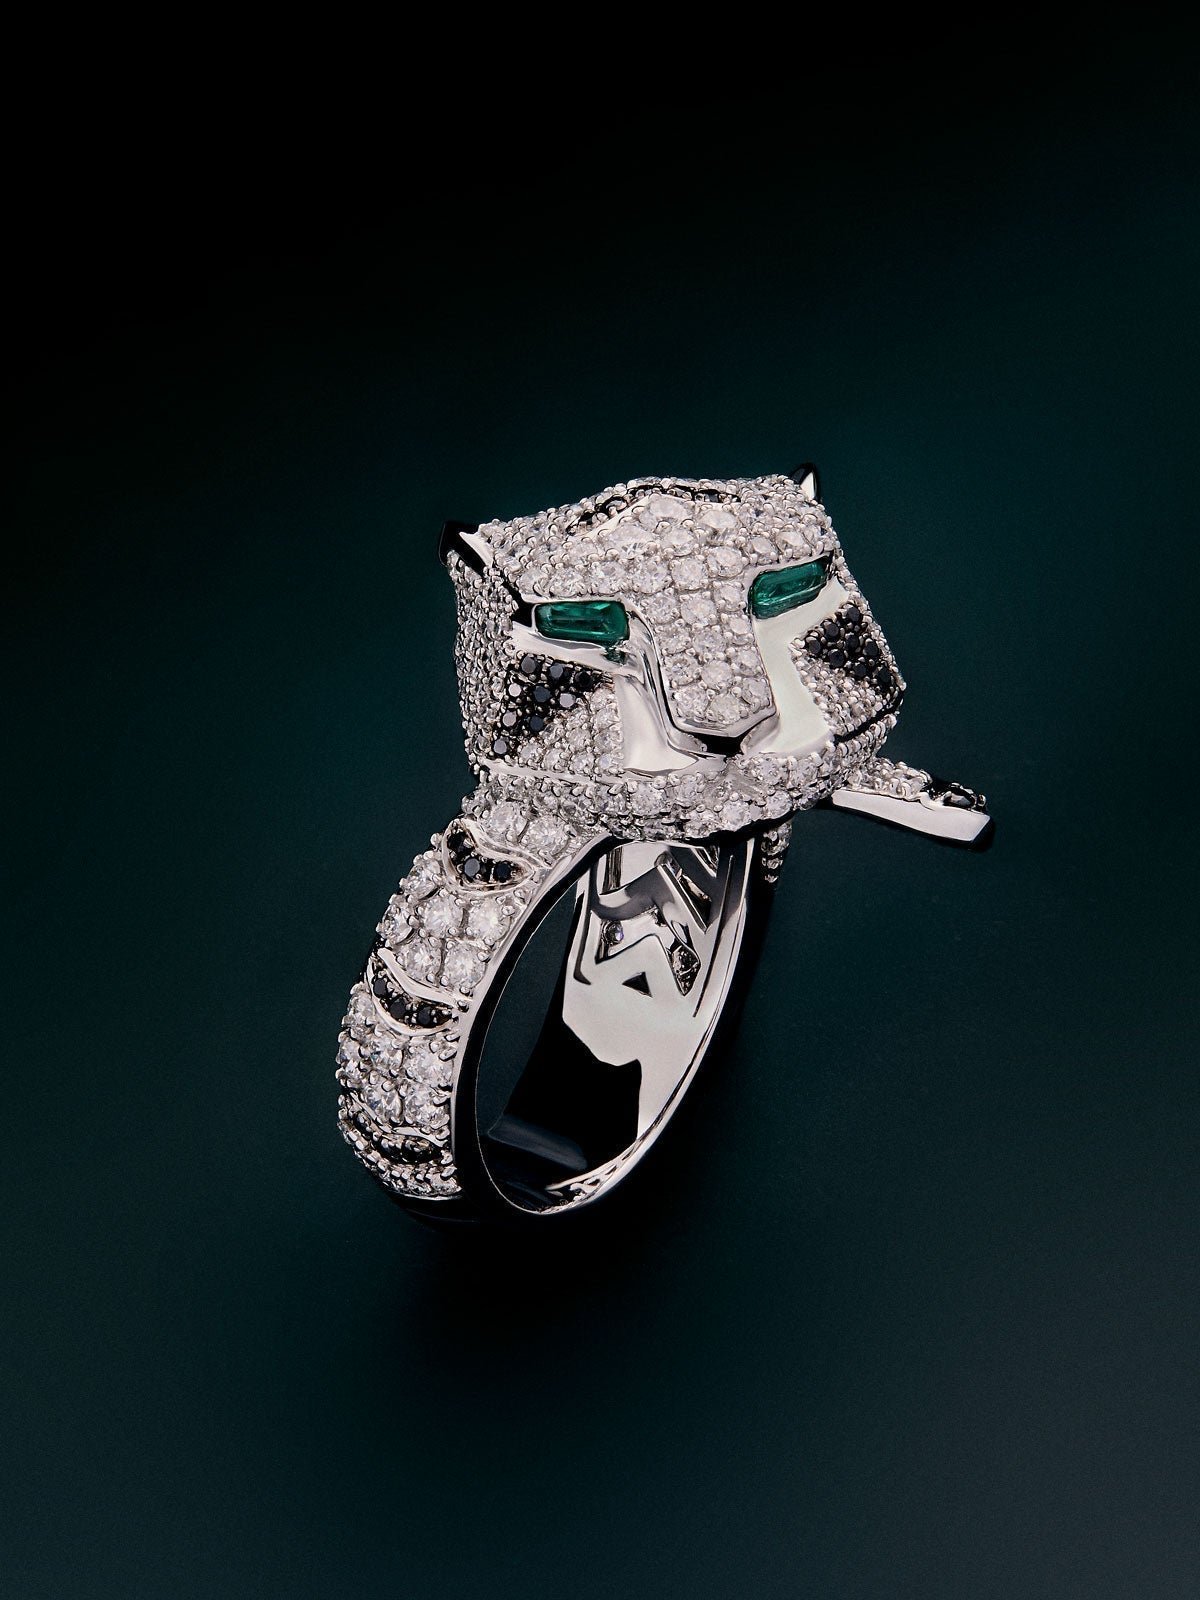 18K white gold ring with 278 brilliant-cut white diamonds with a total of 1.87 cts, 55 brilliant-cut black diamonds with a total of 0.25 cts, and trapezoid-cut emeralds with a total of 0.13 cts tiger-shaped